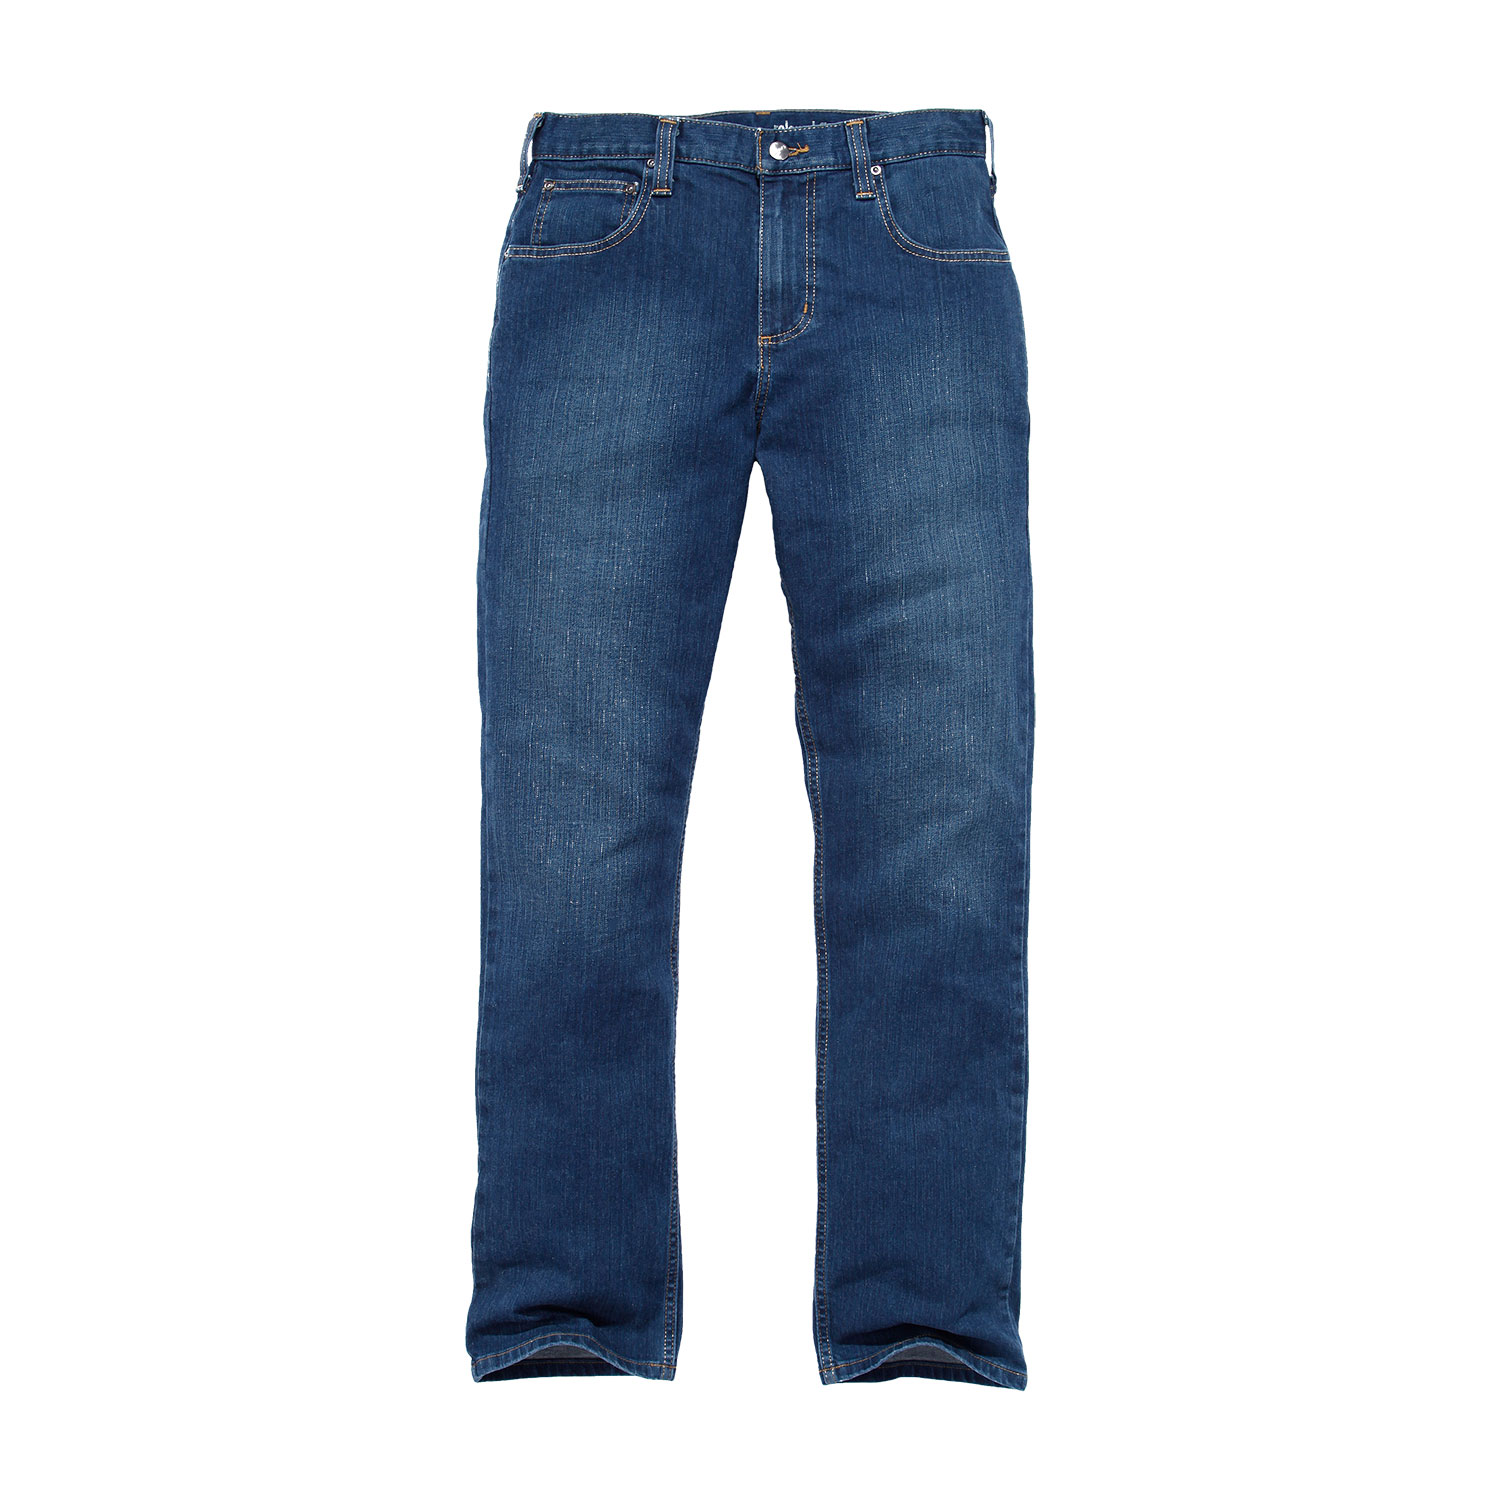 Carhartt Jeans Rugged Flex Relaxed Fit - 1